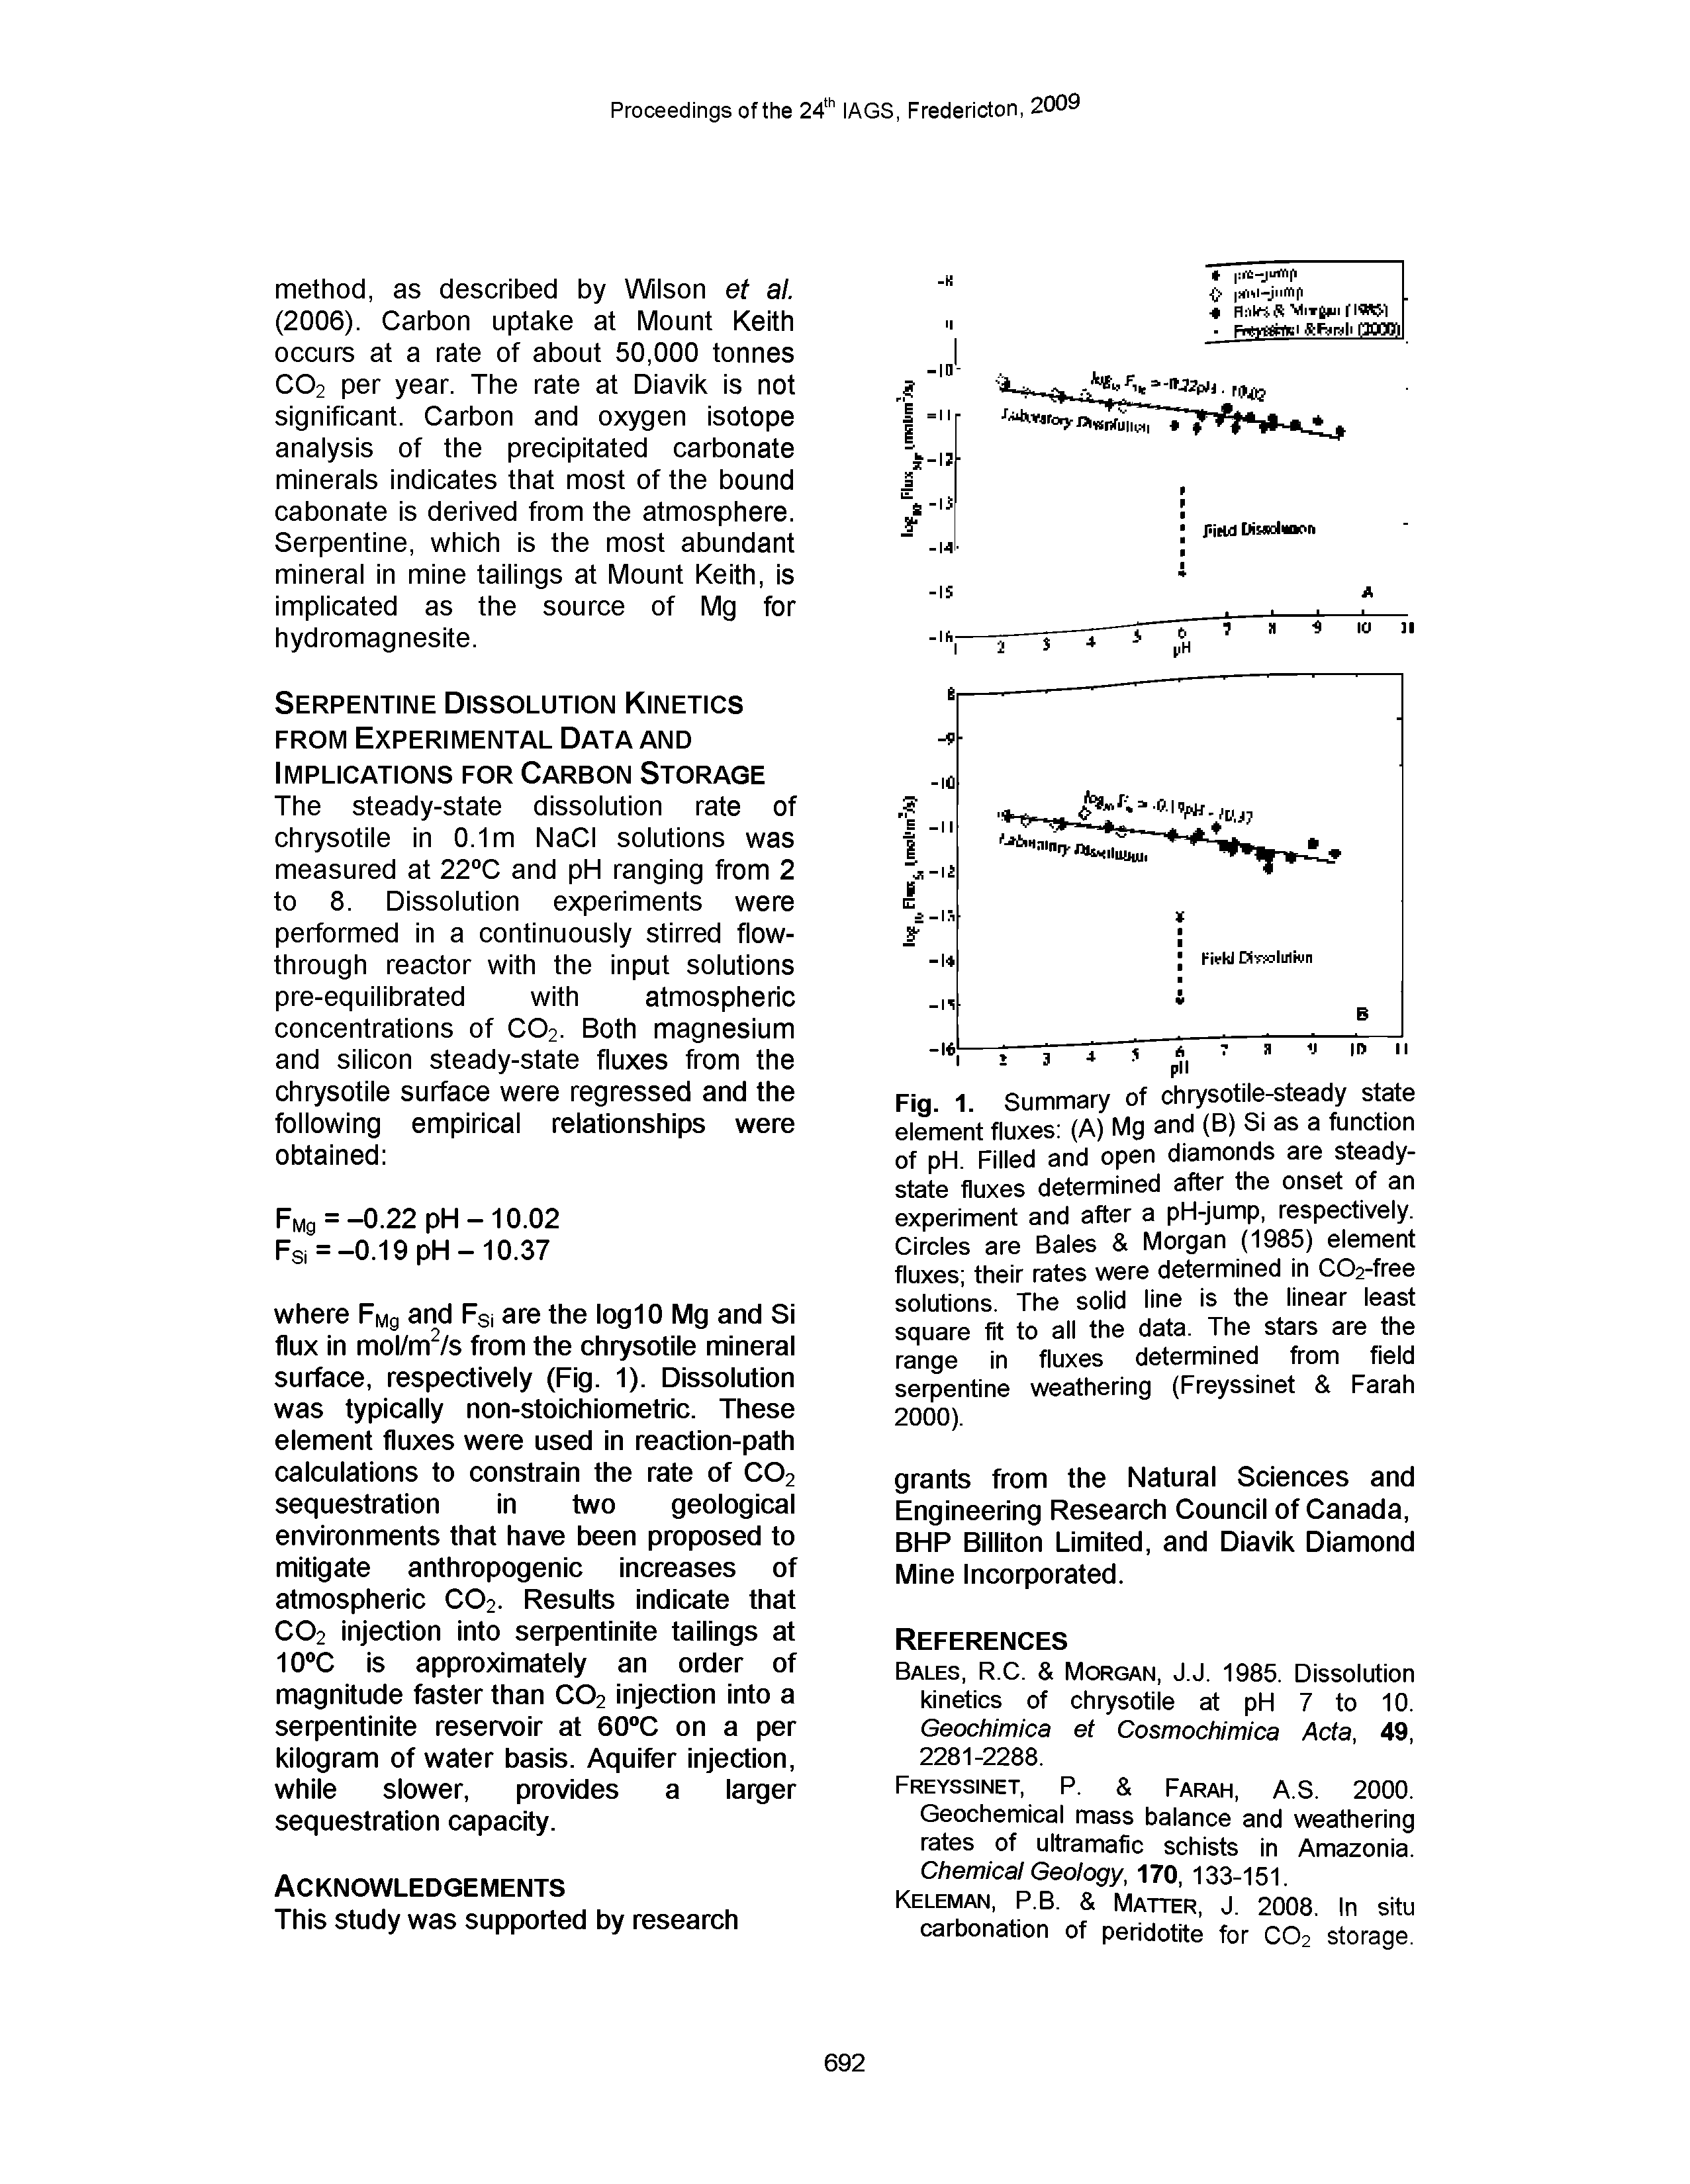 Fig. 1. Summary of chrysotile-steady state element fluxes (A) Mg and (B) Si as a function of pH. Filled and open diamonds are steady-state fluxes determined after the onset of an experiment and after a pH-jump, respectively. Circles are Bales Morgan (1985) element fluxes their rates were determined in C02-free solutions. The solid line is the linear least square fit to all the data. The stars are the range in fluxes determined from field serpentine weathering (Freyssinet Farah 2000).